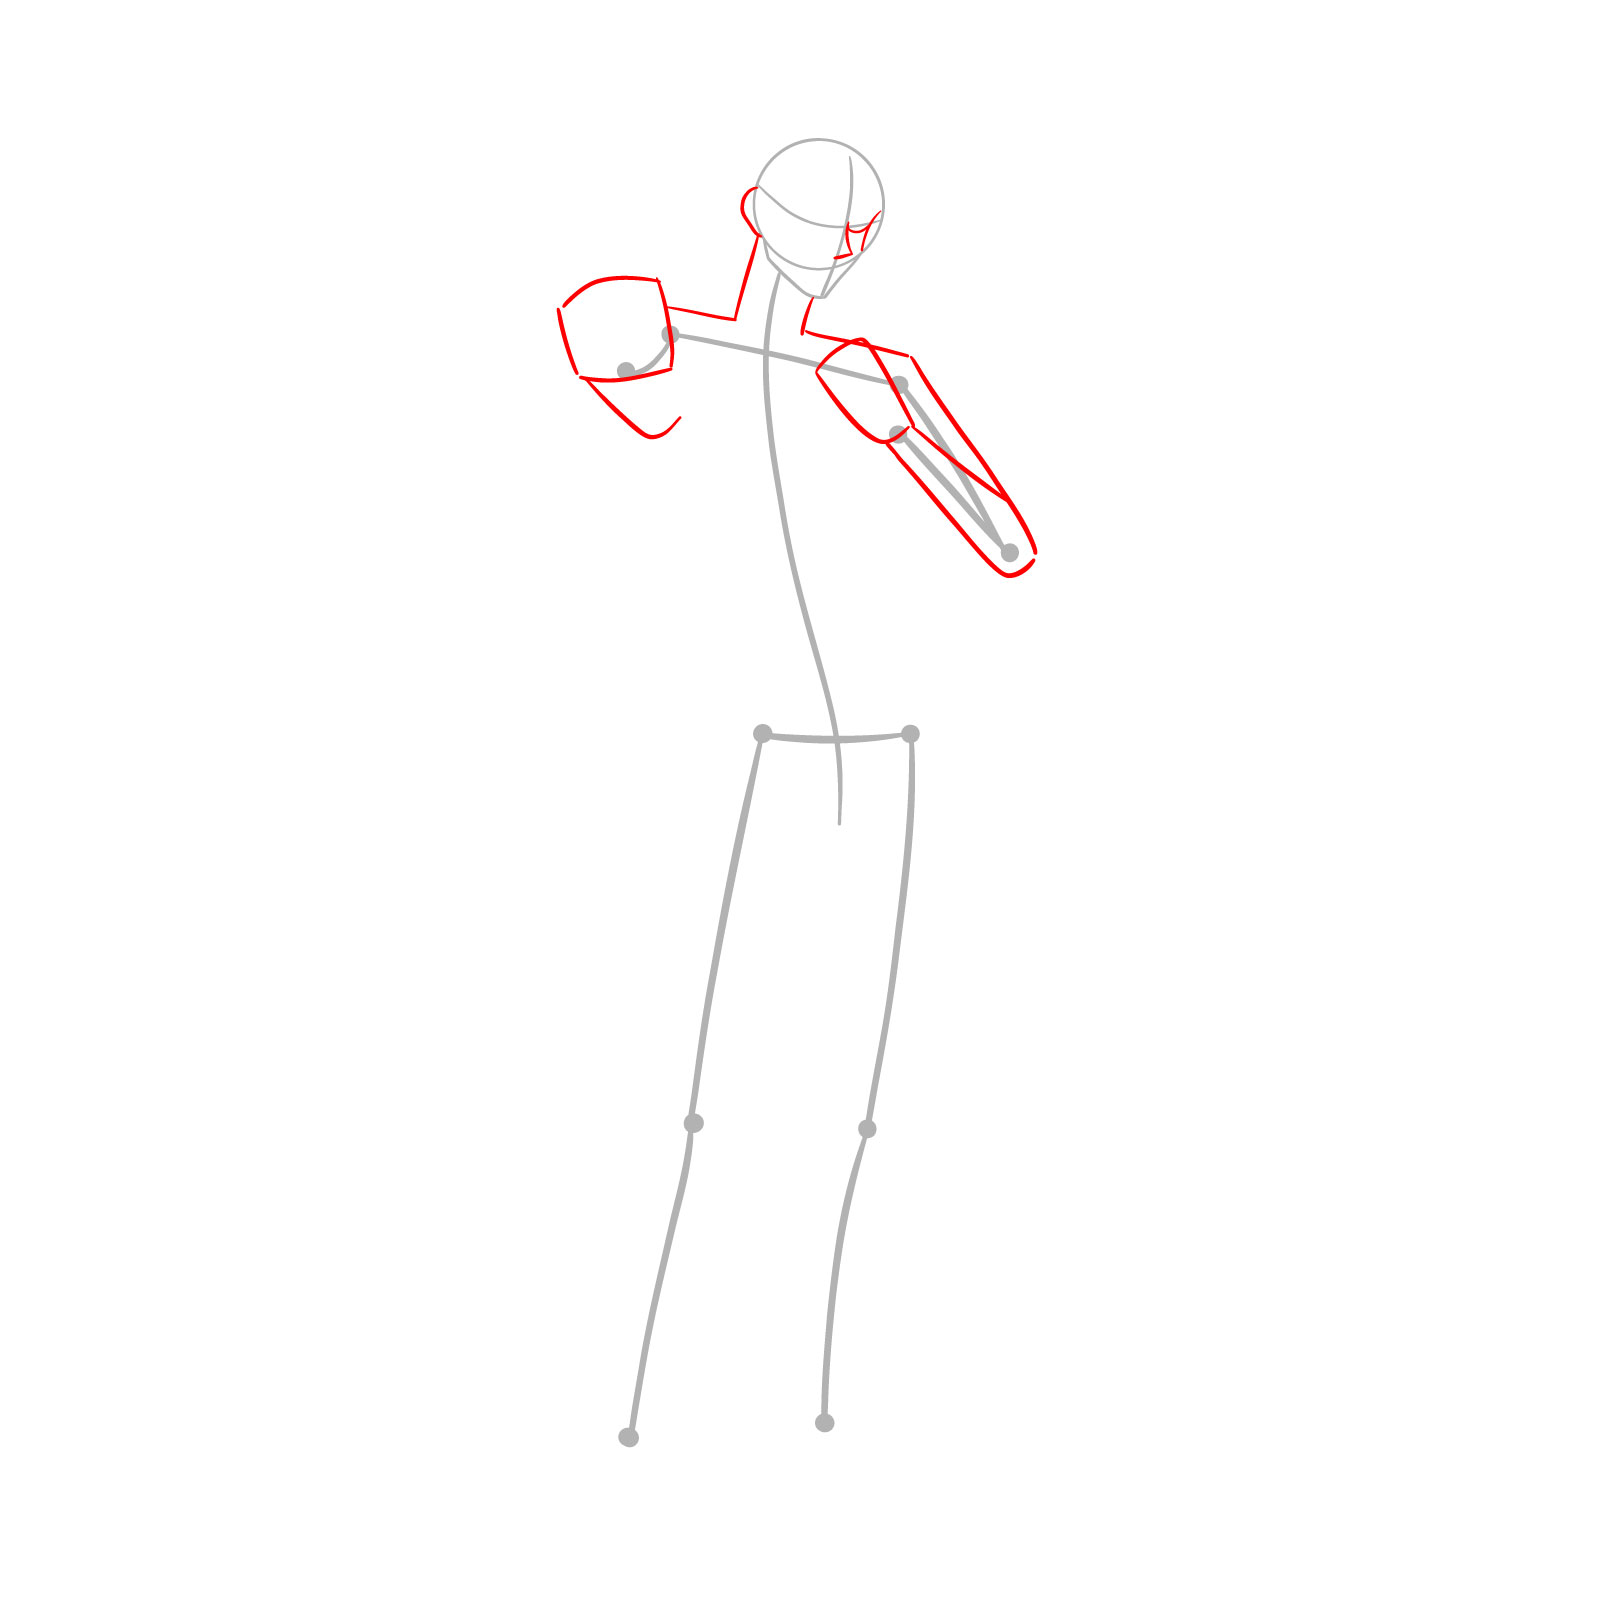 Addition of basic shapes to outline Satoru Gojo's upper body and arms in the drawing - step 02